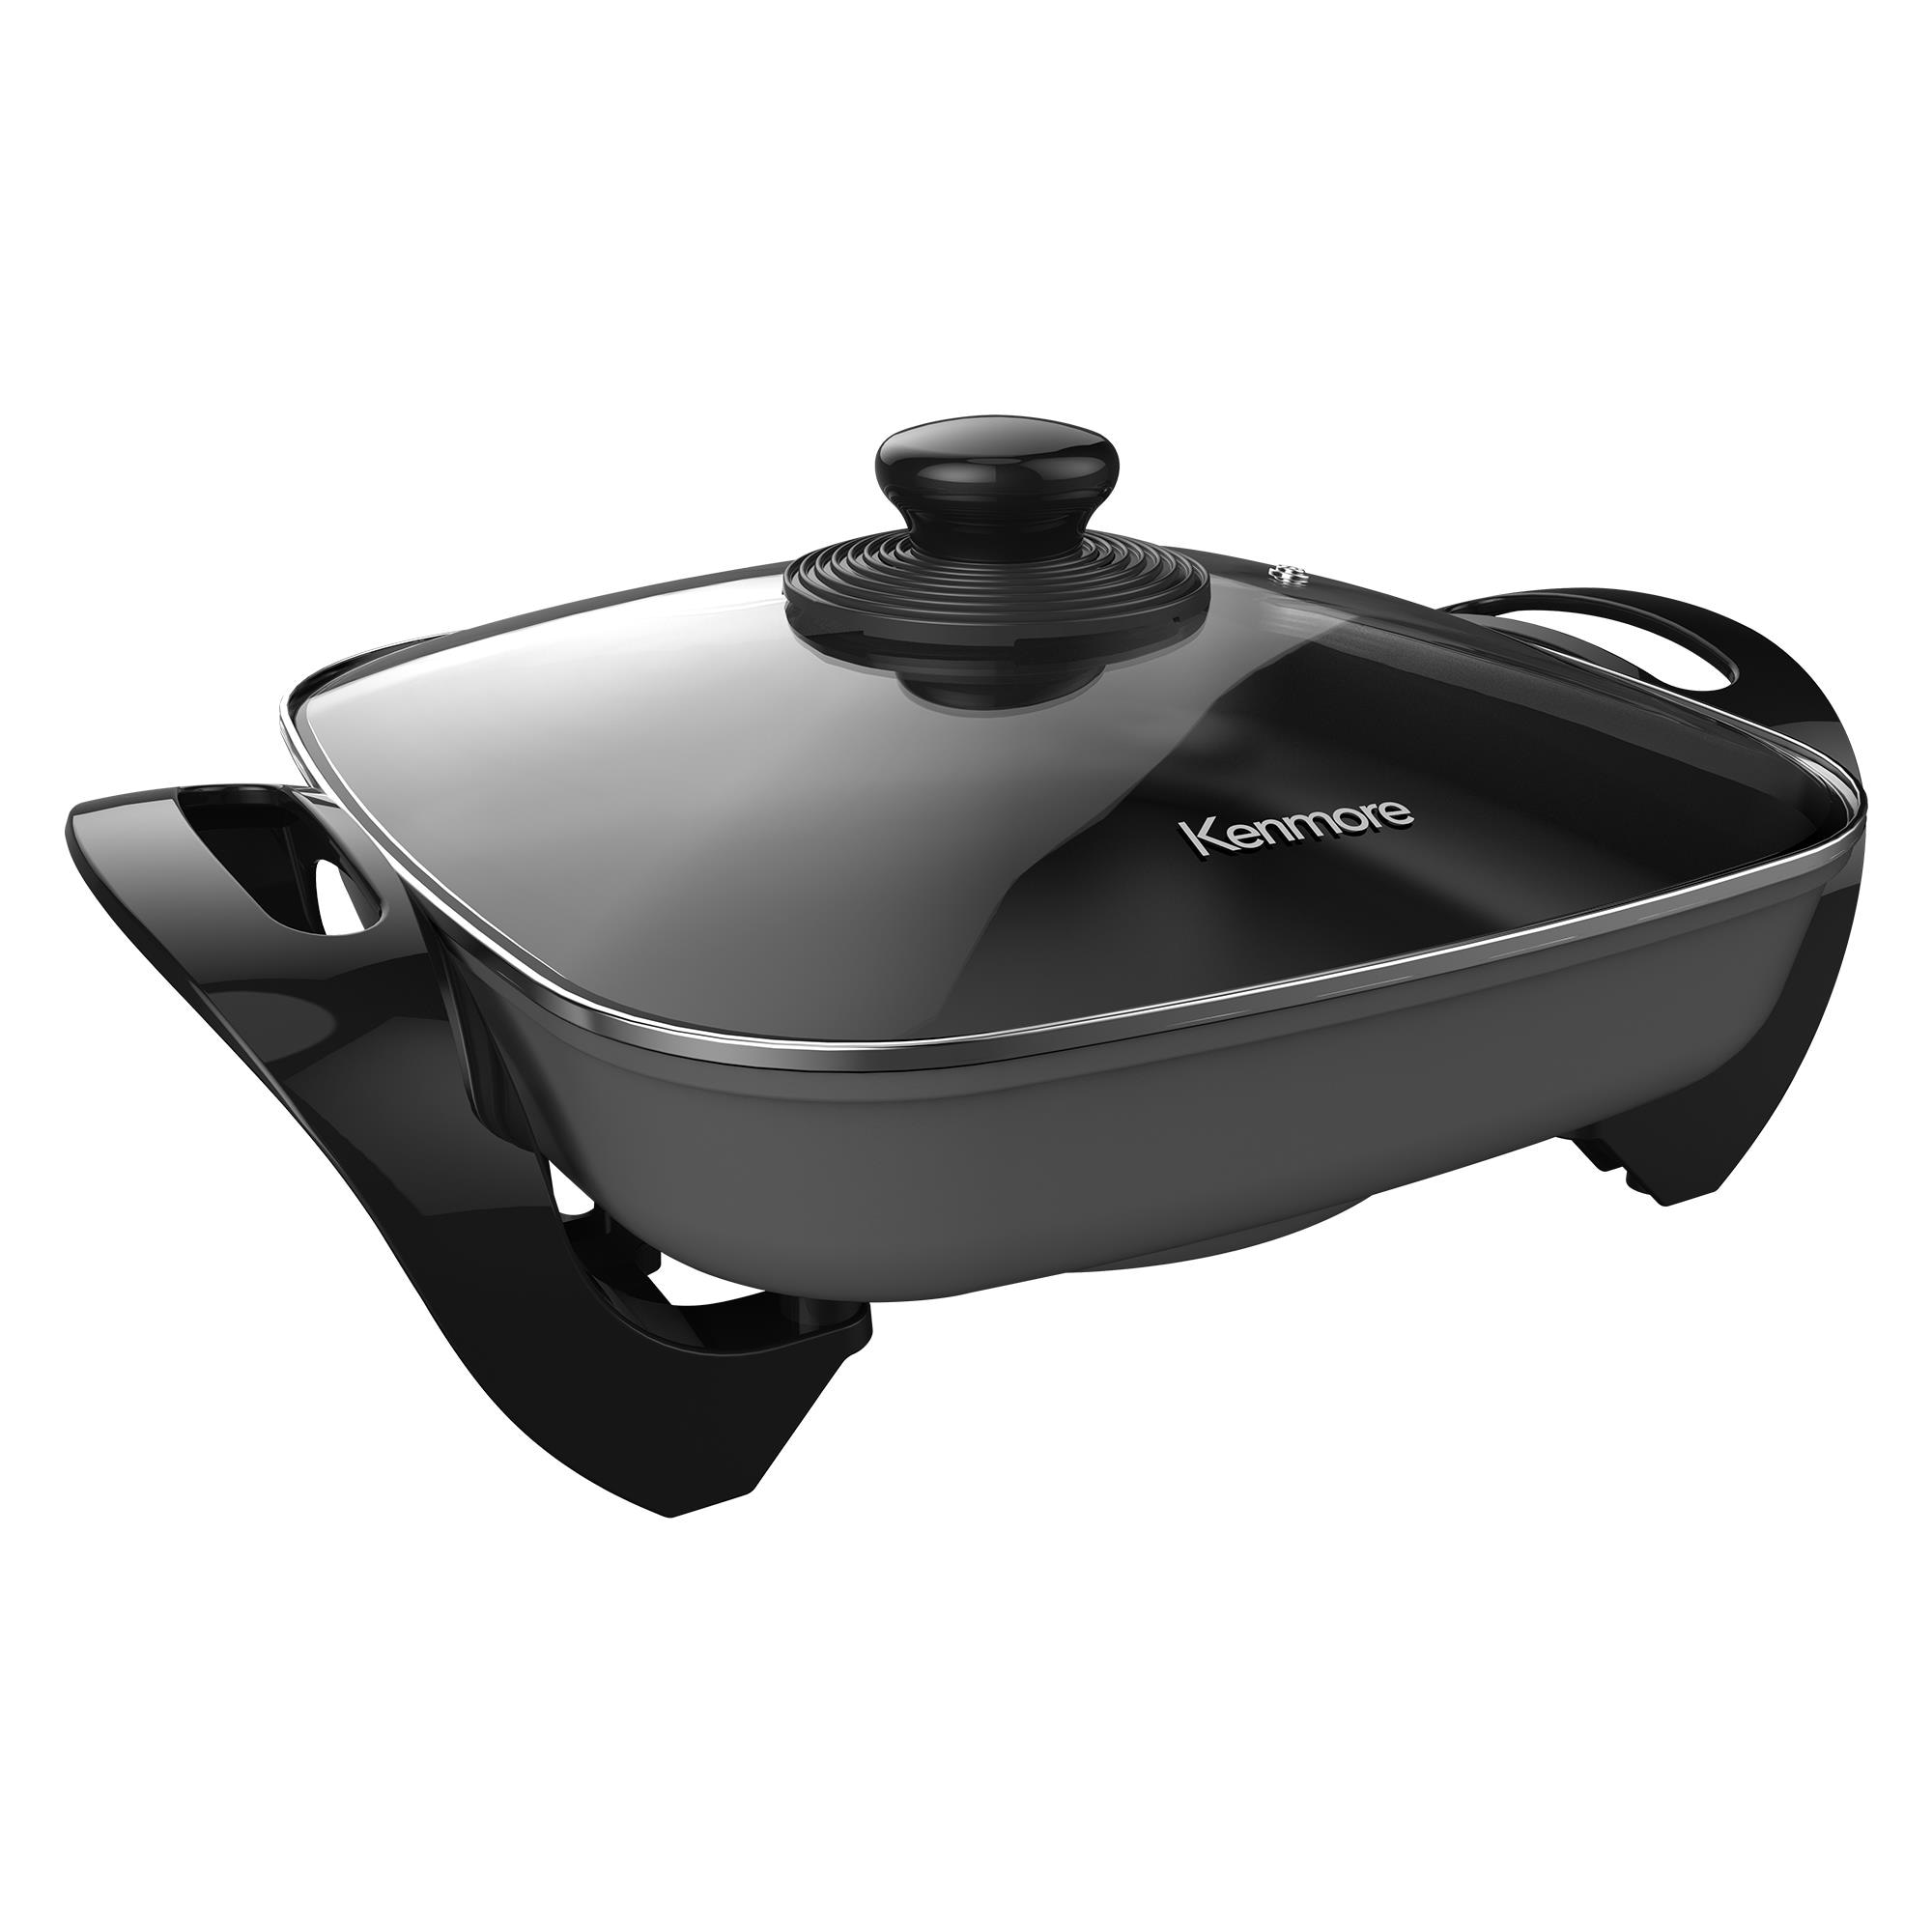 Presto Ceramic 22-inch Electric Griddle with removable handles, One Size,  Black & 06852 16-Inch Electric Skillet with Glass Cover